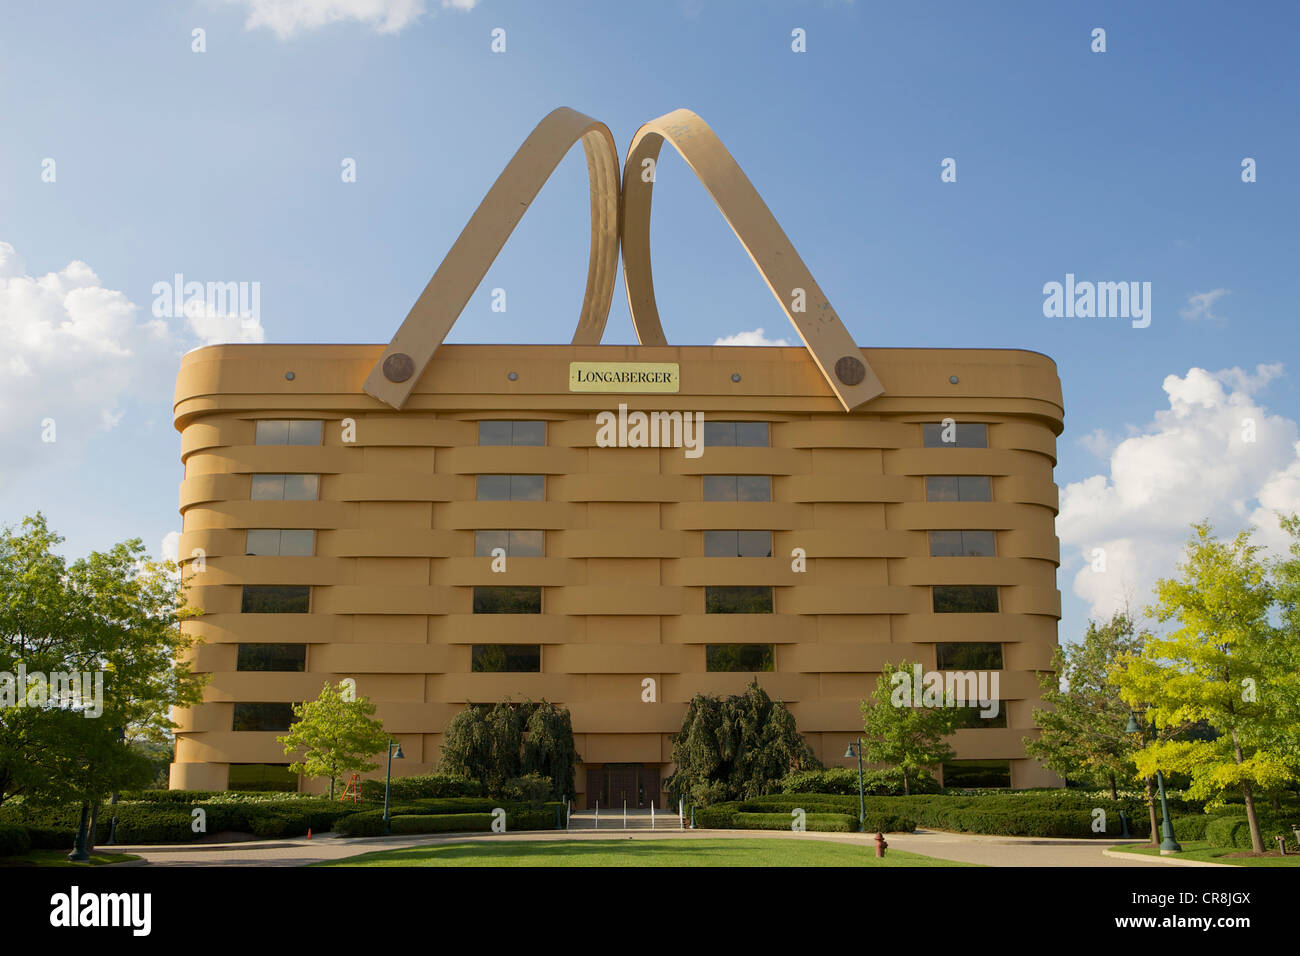 The Longaberger Company Headquarters In Newark Ohio Stock Photo Alamy,Cheapest Cities In Us To Visit